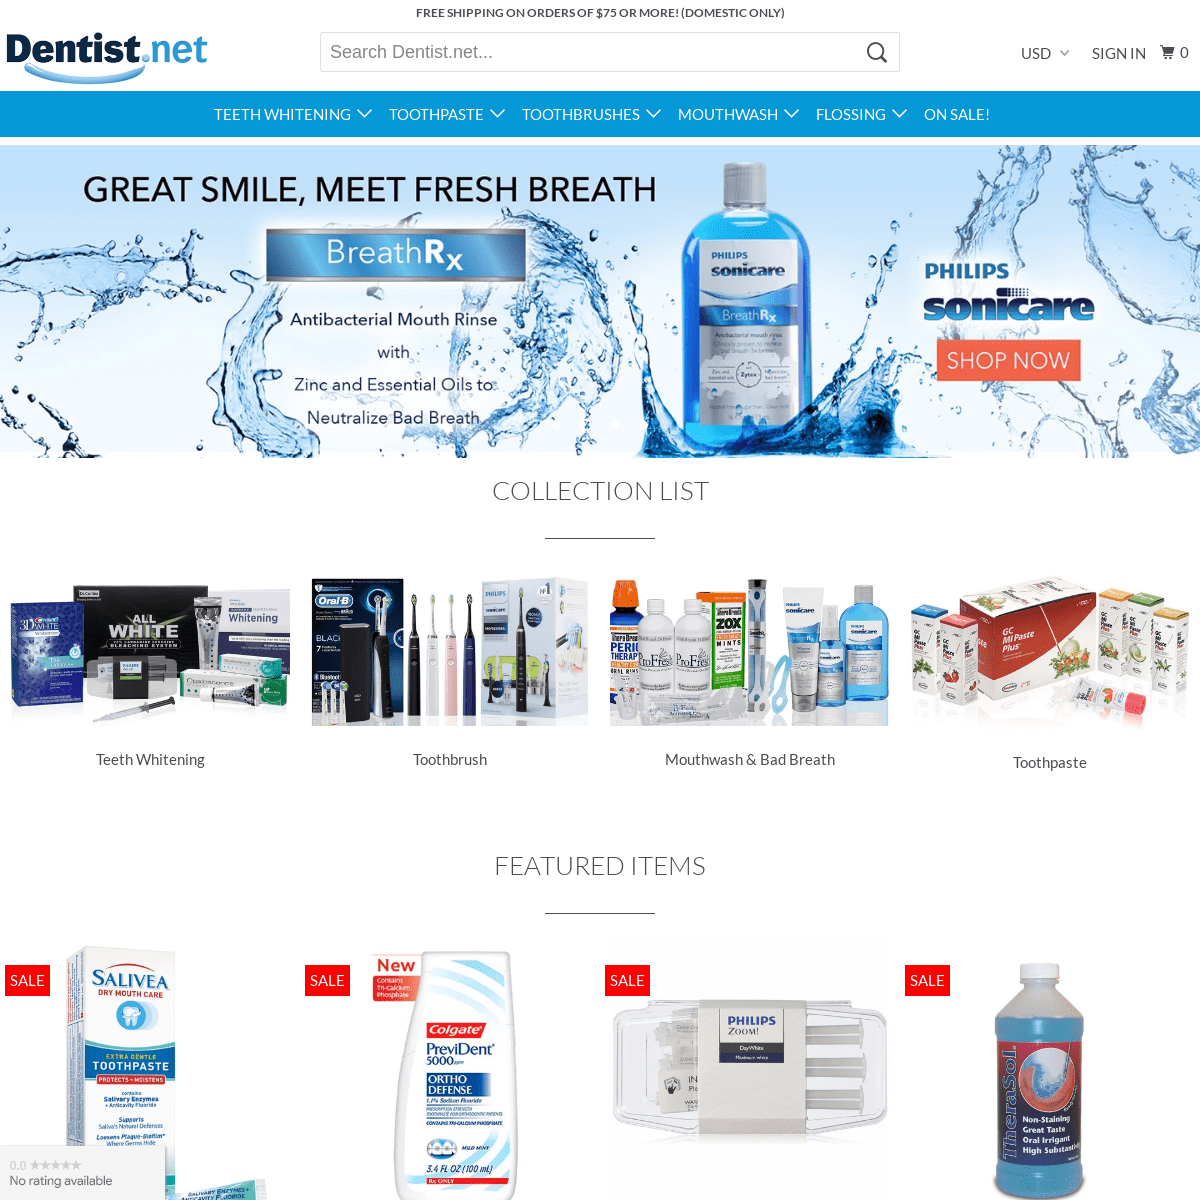 All Your Dental Products in one place at the best Prices Online!